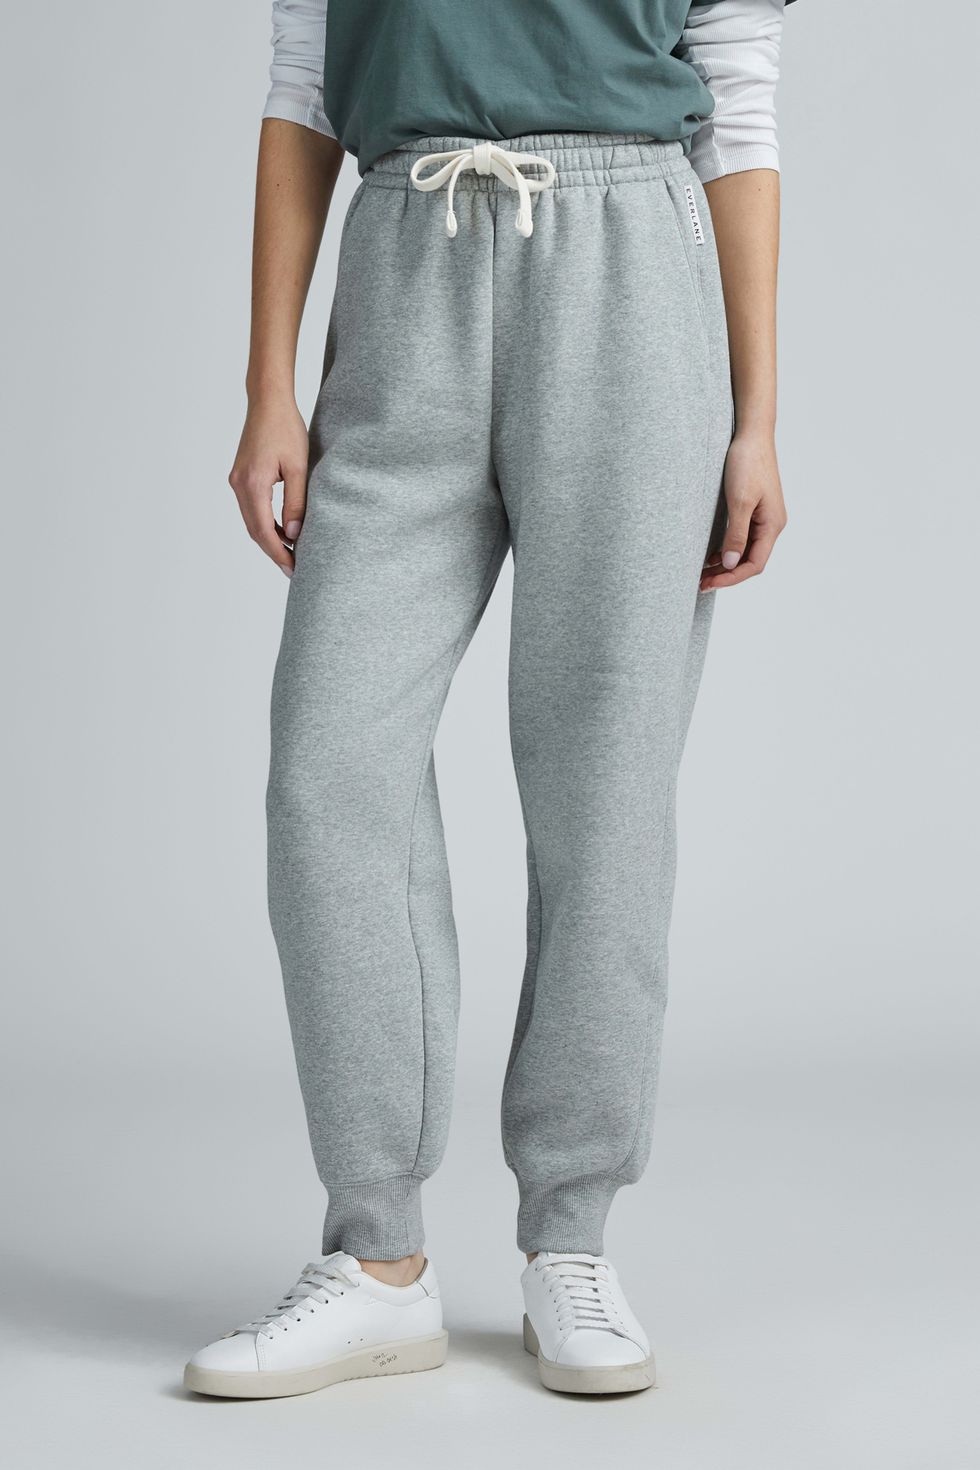 15 Most Comfortable Sweatpants & Joggers for Women - 2024